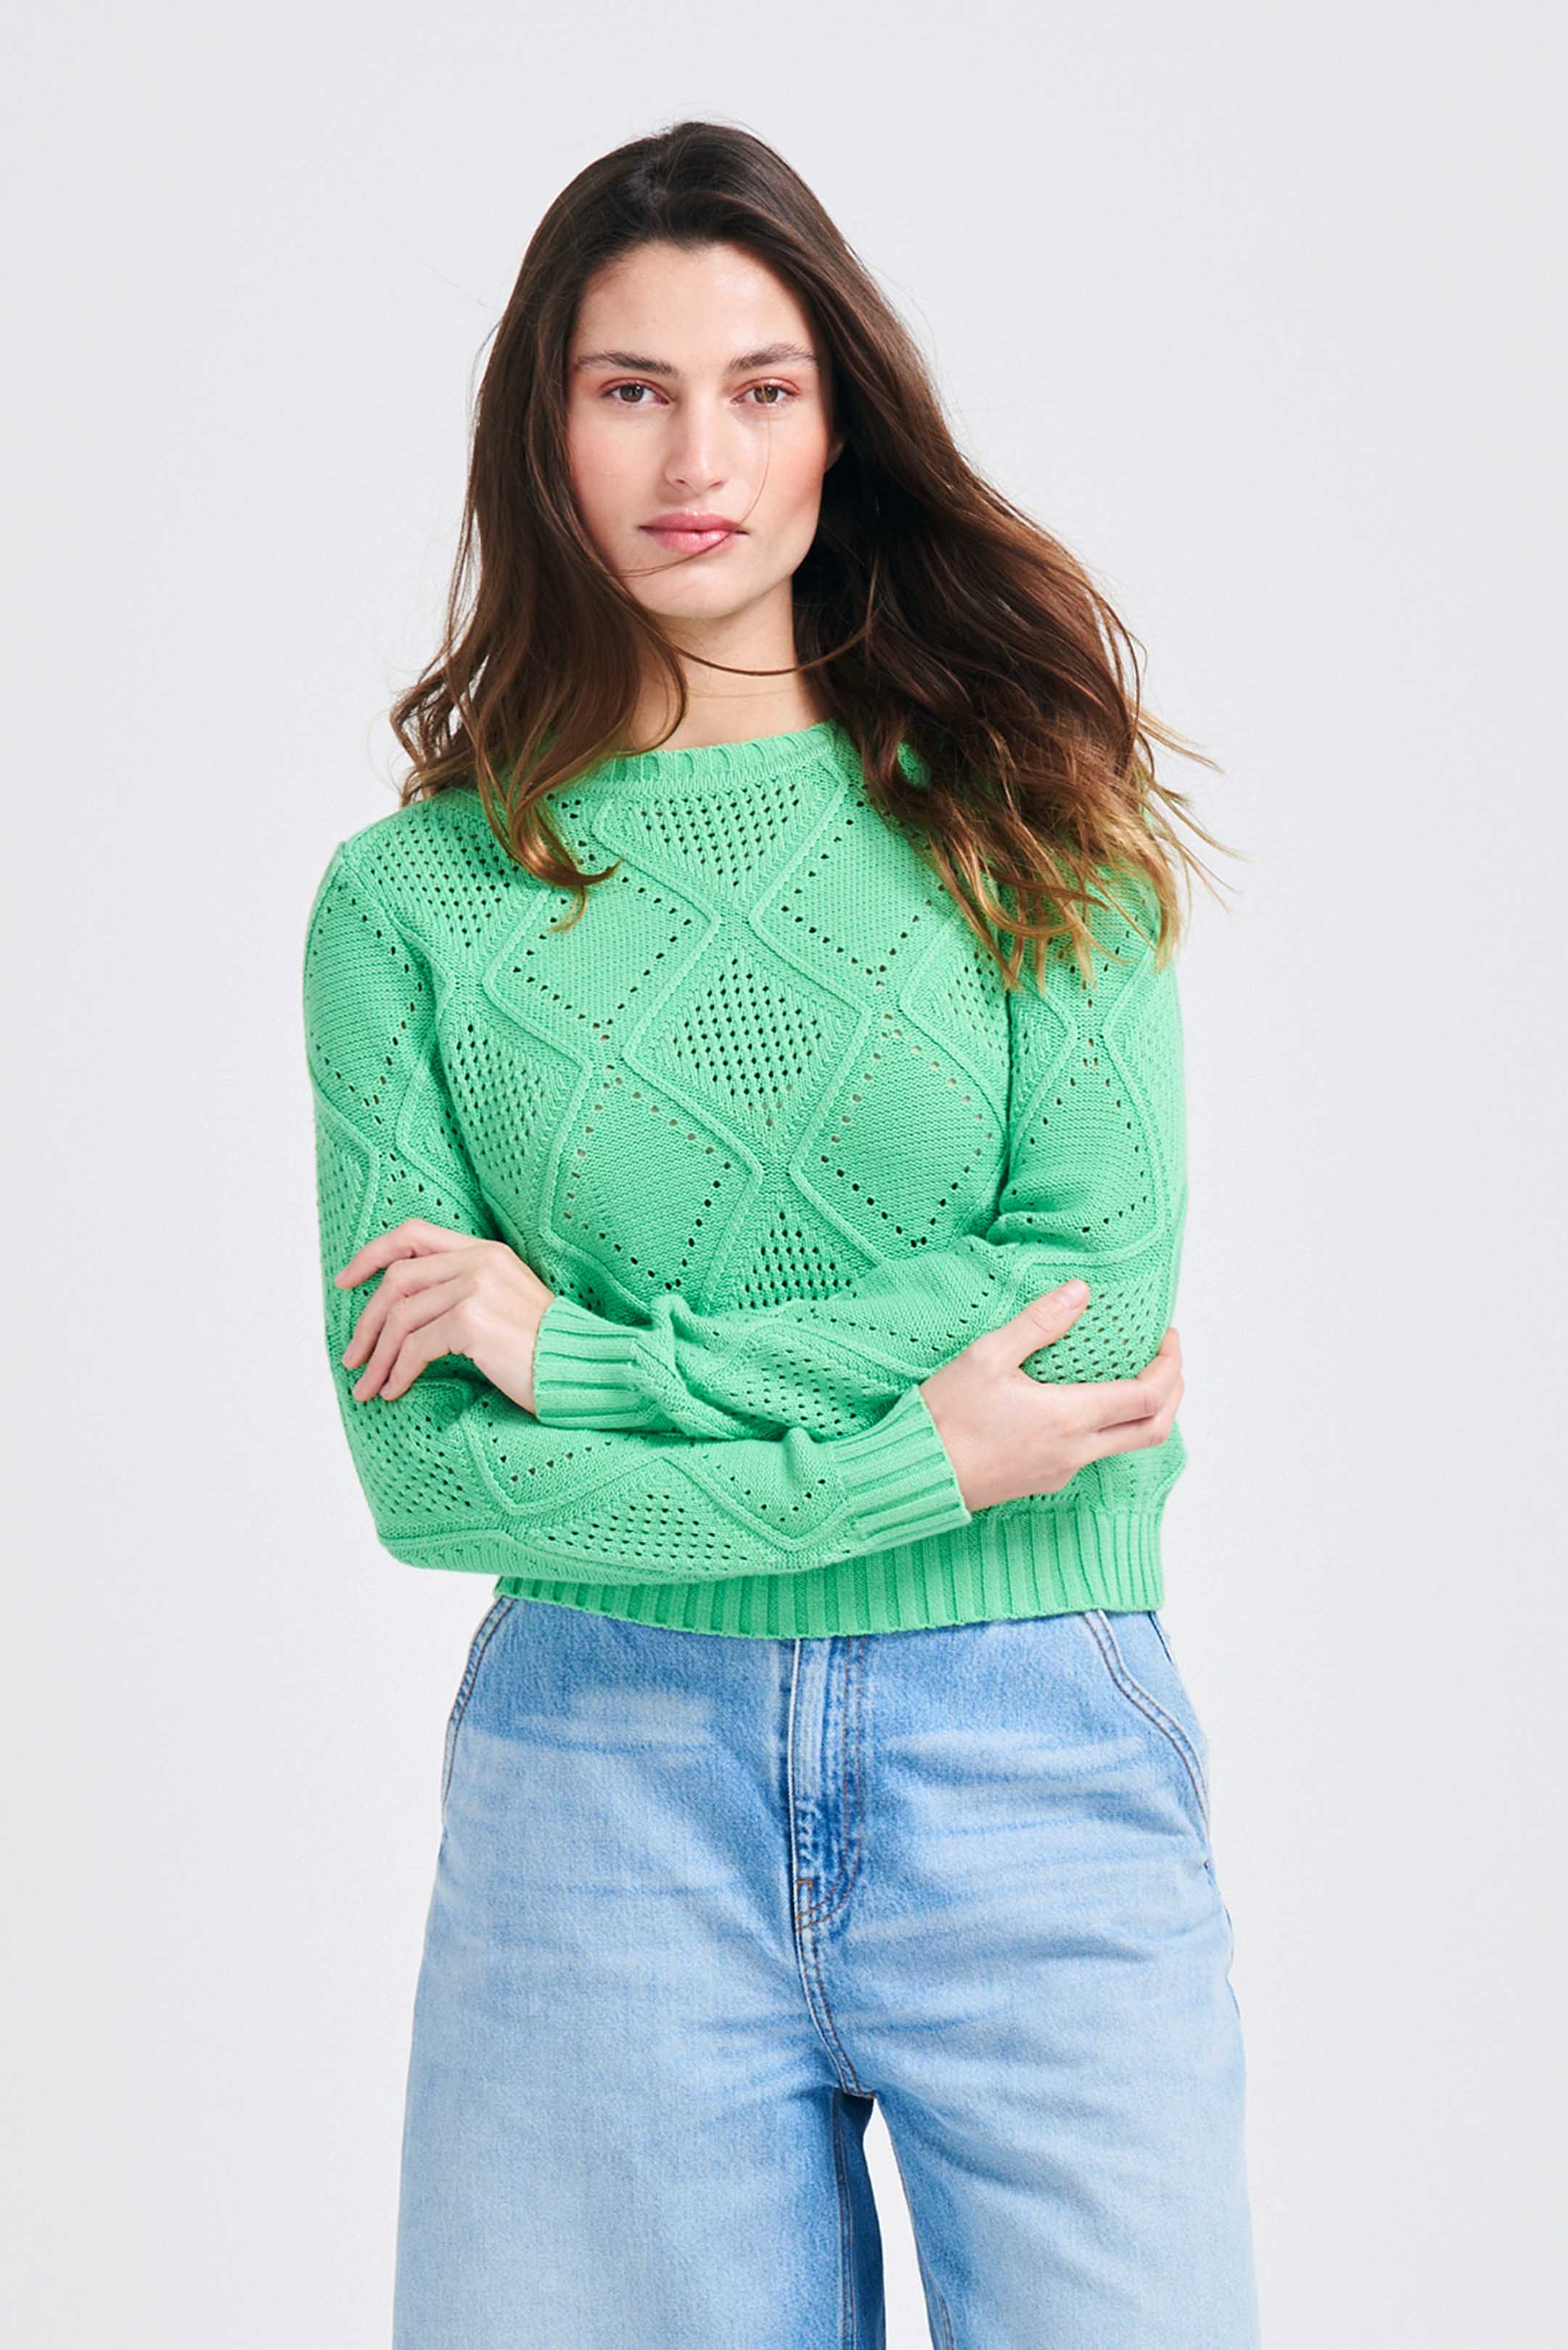 Brown haired female model wearing Jumper1234 Apple green cotton crew neck jumper with a diamond texture stitch pattern